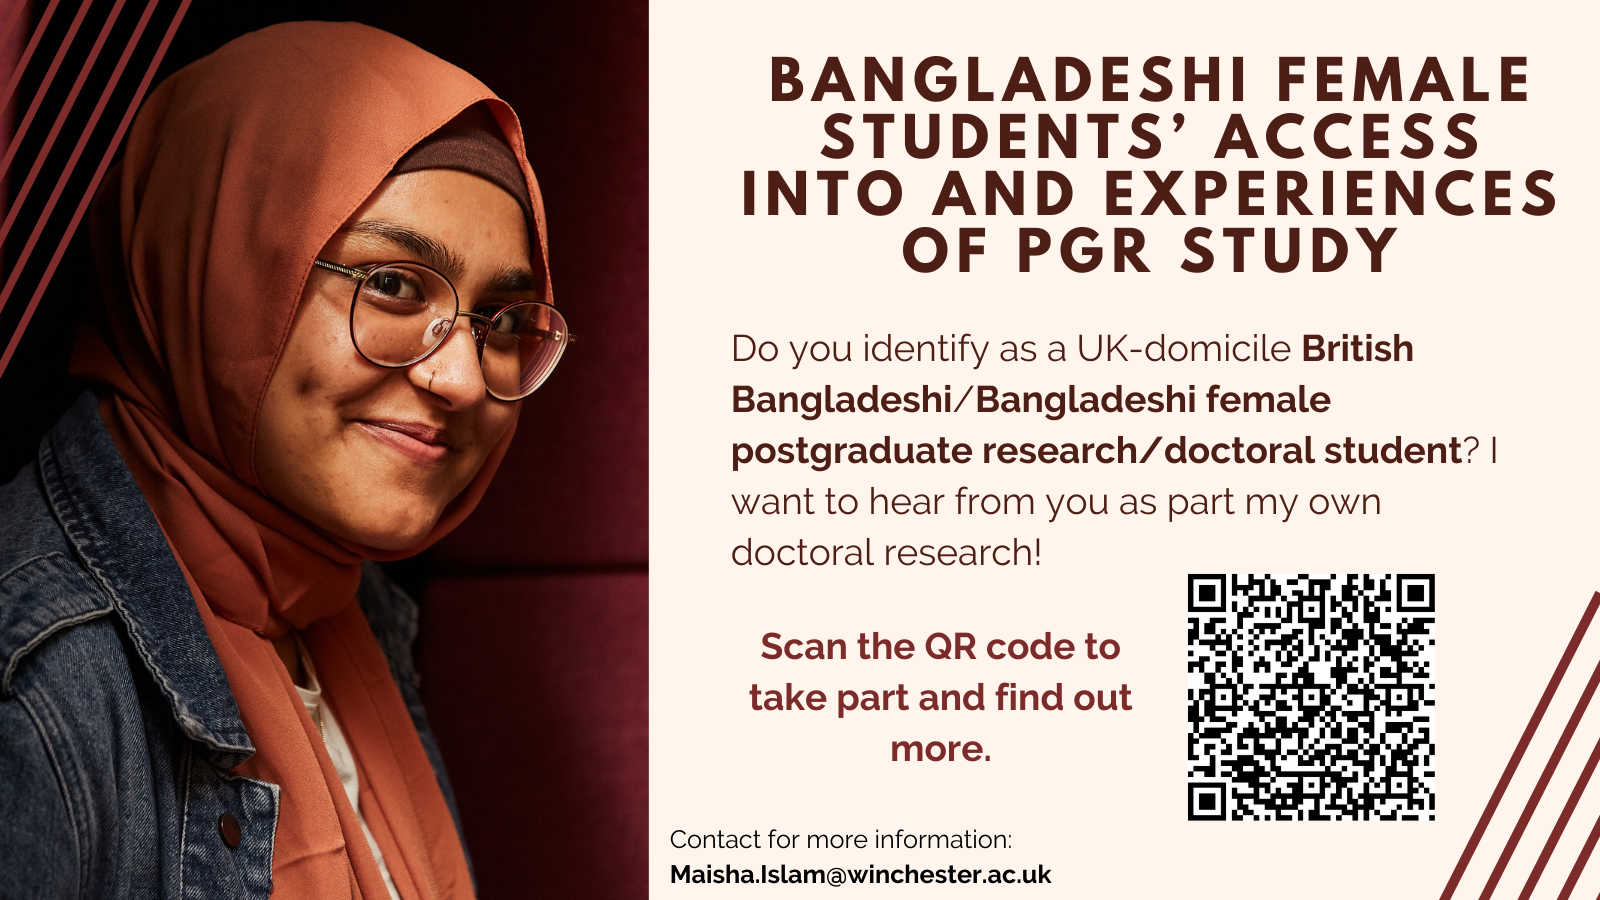 advert for study participation investigating Bangladeshi Female PGRs